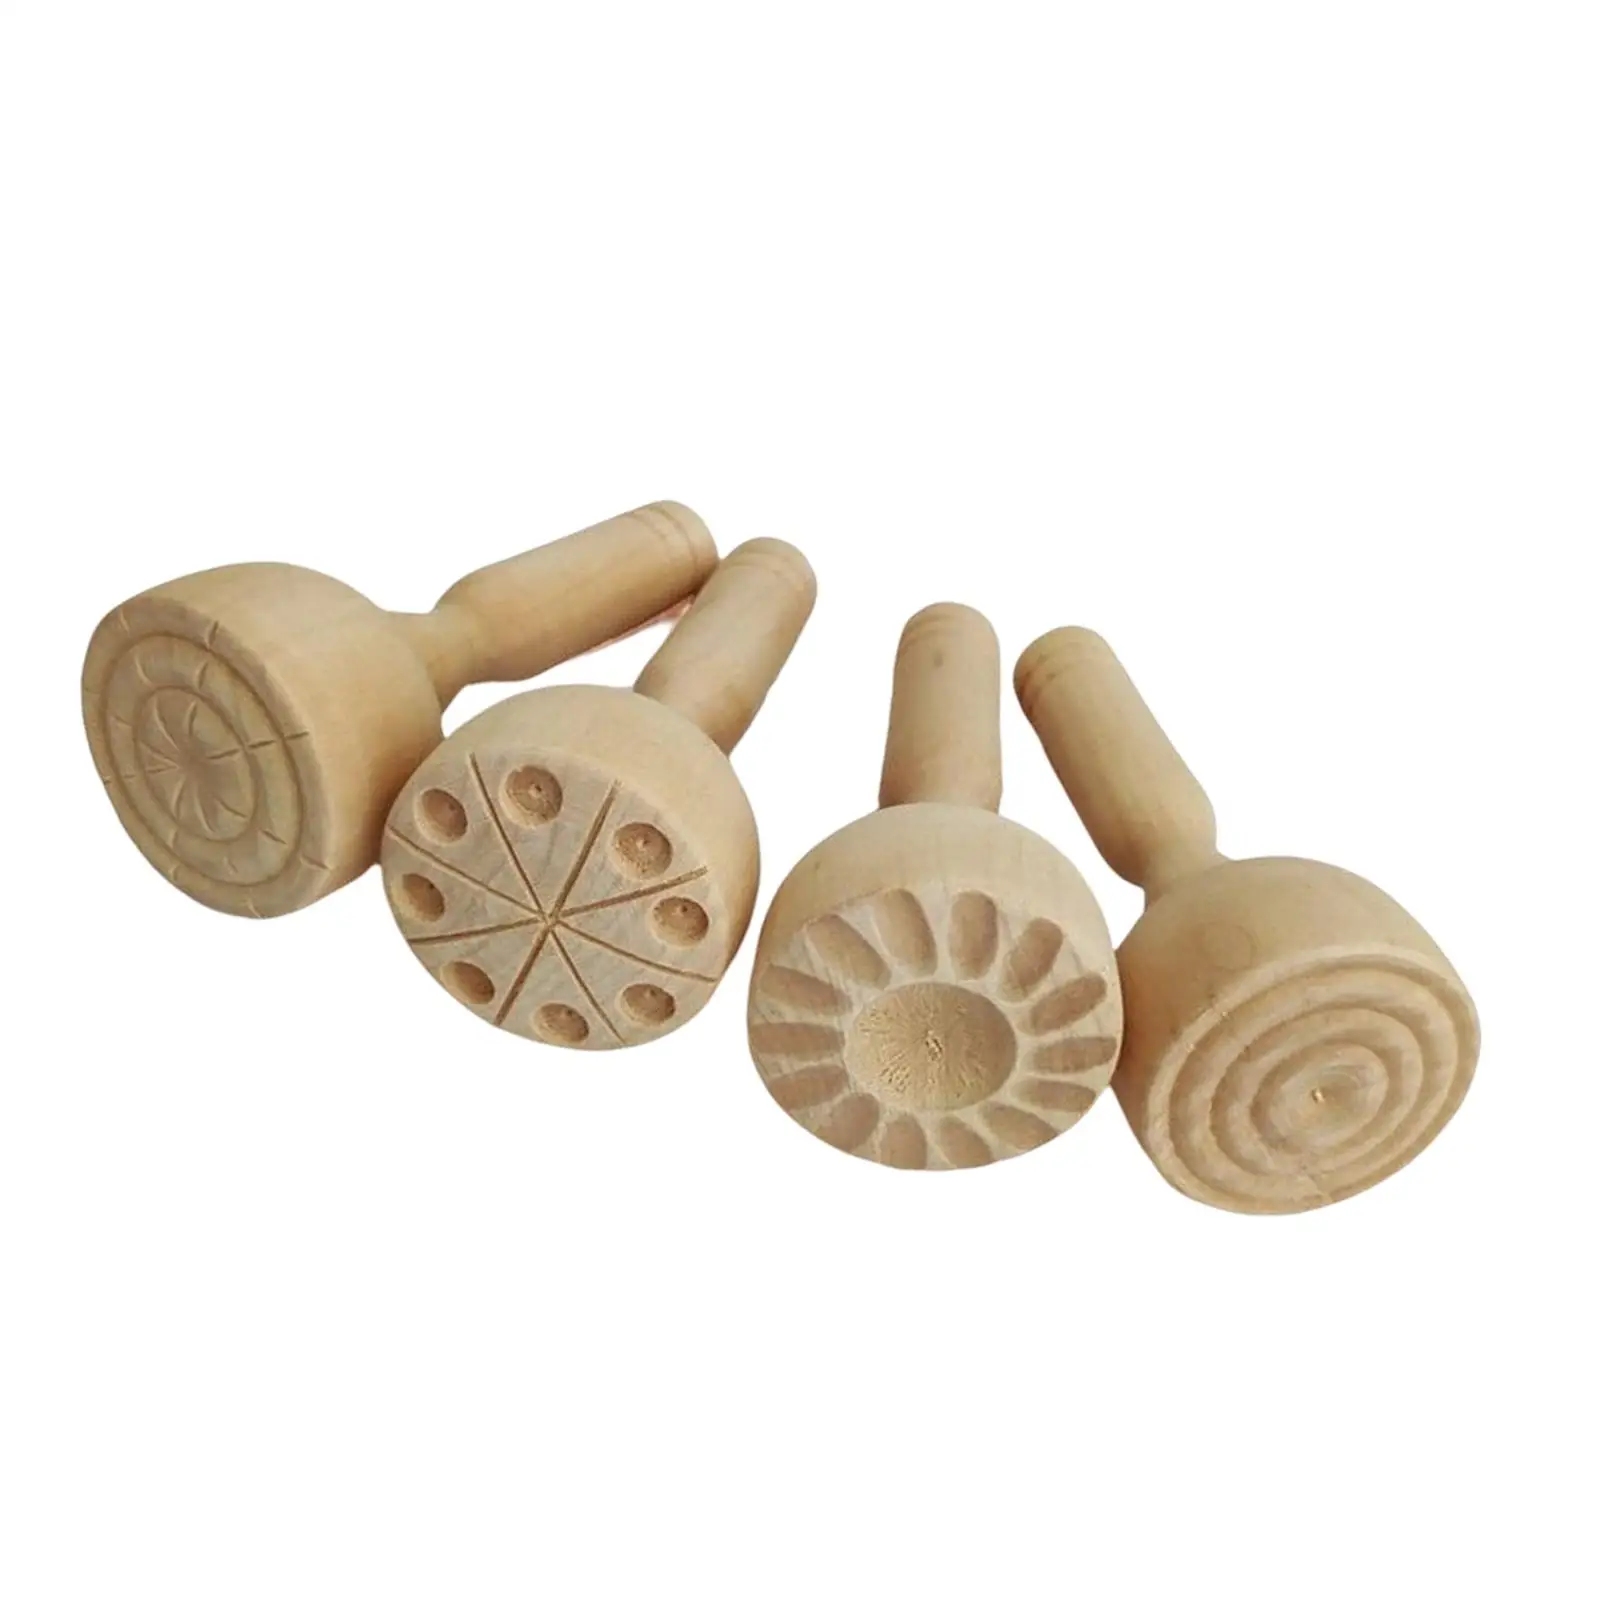 4x Traditional Wooden seal DIY Decoration Educational Toys Press Molds Tools mould Supplies for Toddler Art Craft